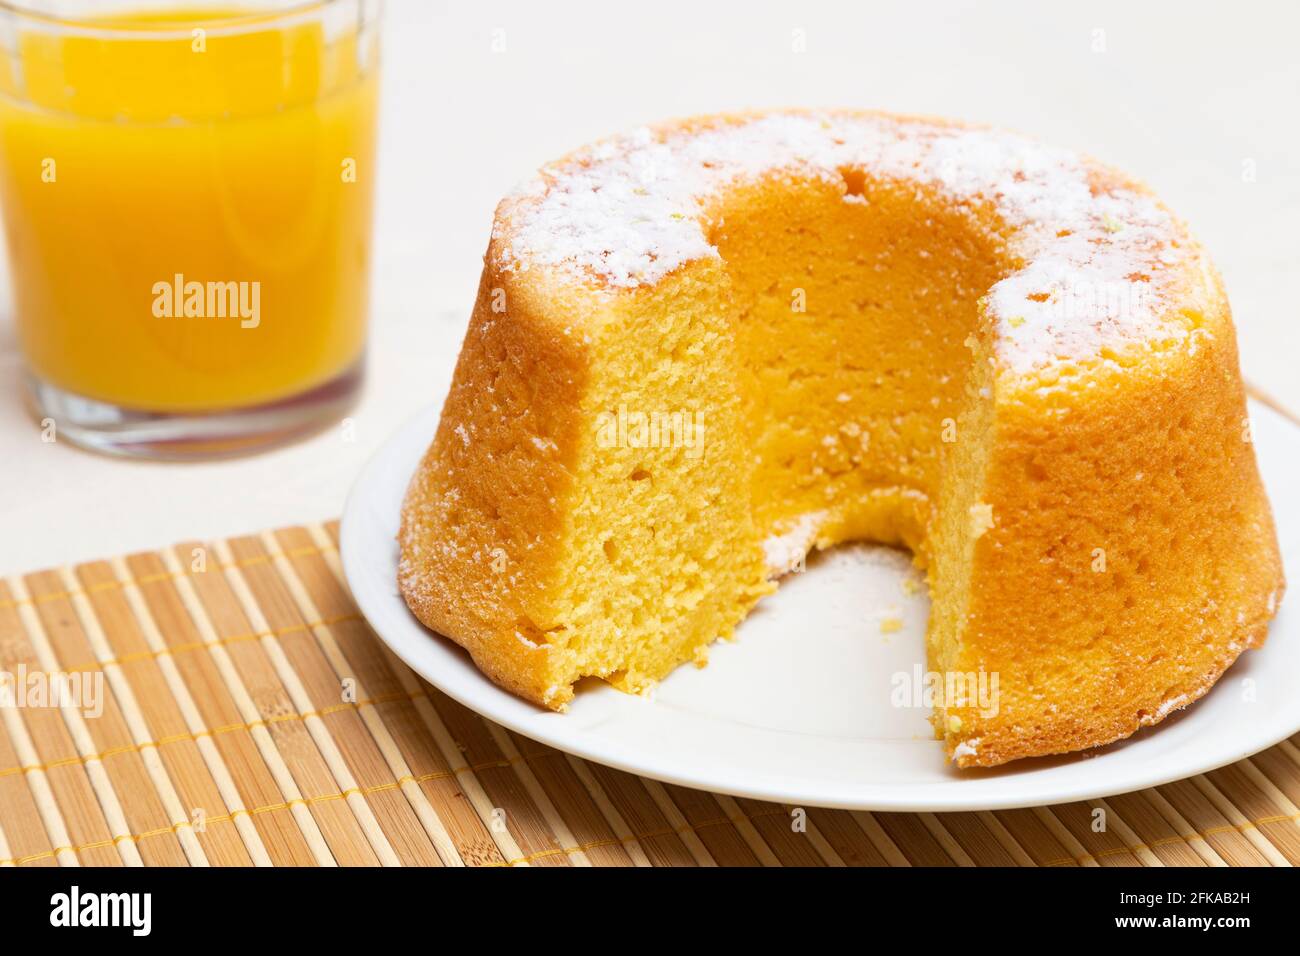 Orange cake with a little icing sugar and a glass of orange juice. Stock Photo